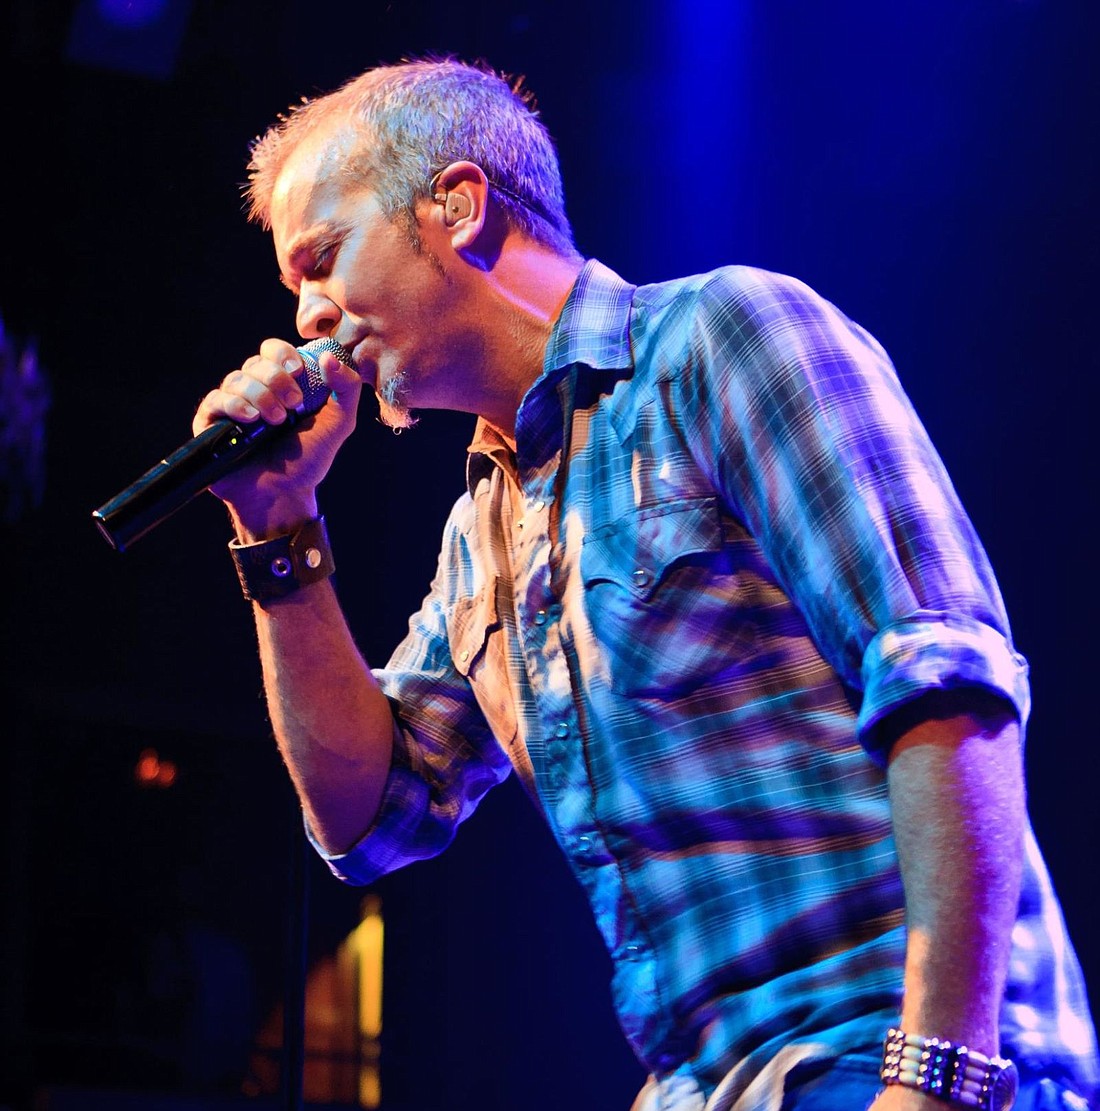 JJ Grey & Mofro will perform at The Capitol Theatre in Port Chester Sat., Mar. 30. See 10573 Events below for details.